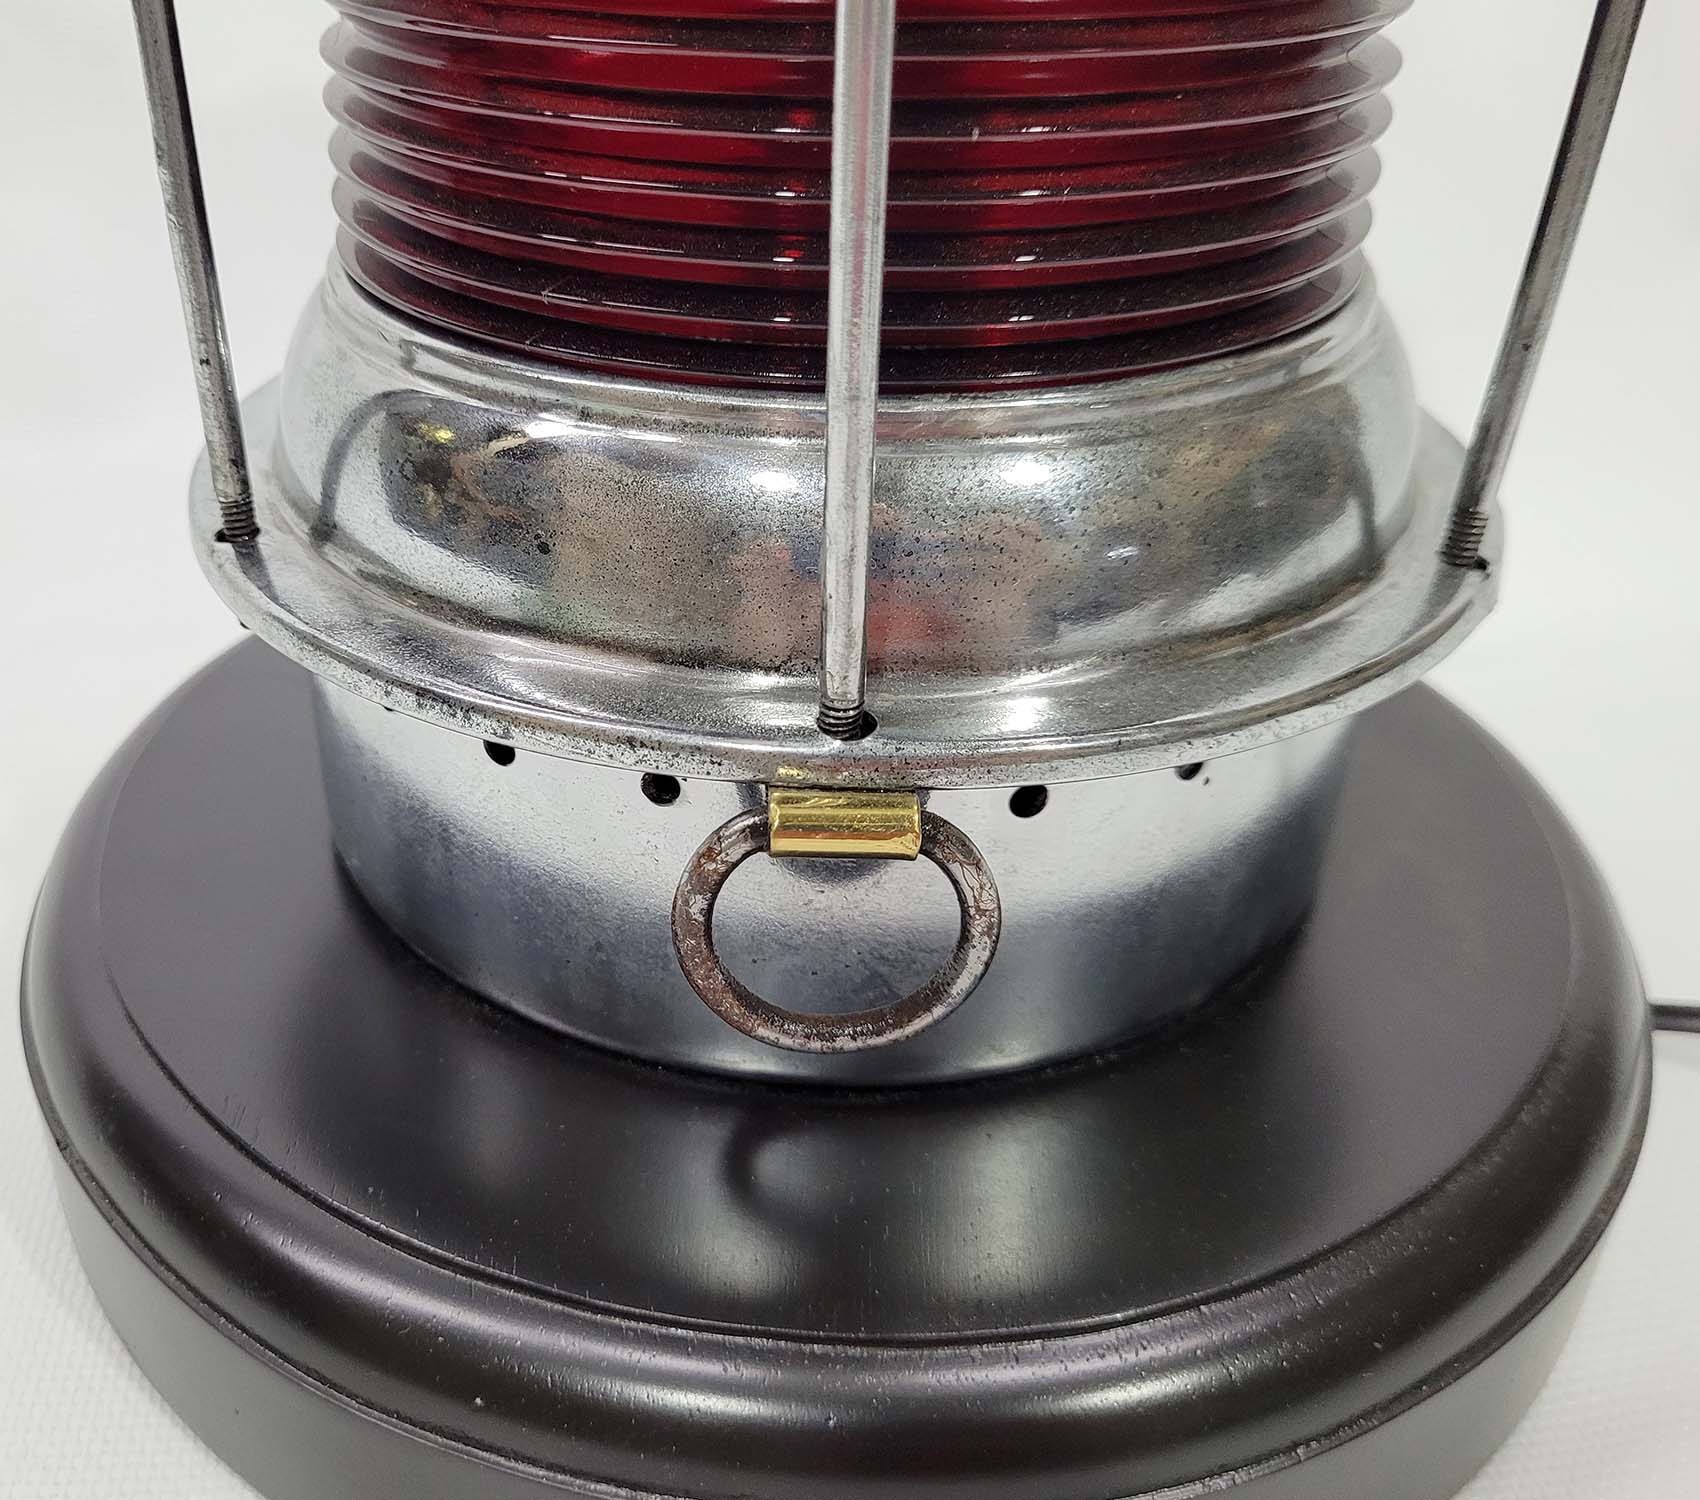 Polished Steel Ships Lantern with Ruby Red Lens - Lannan Gallery